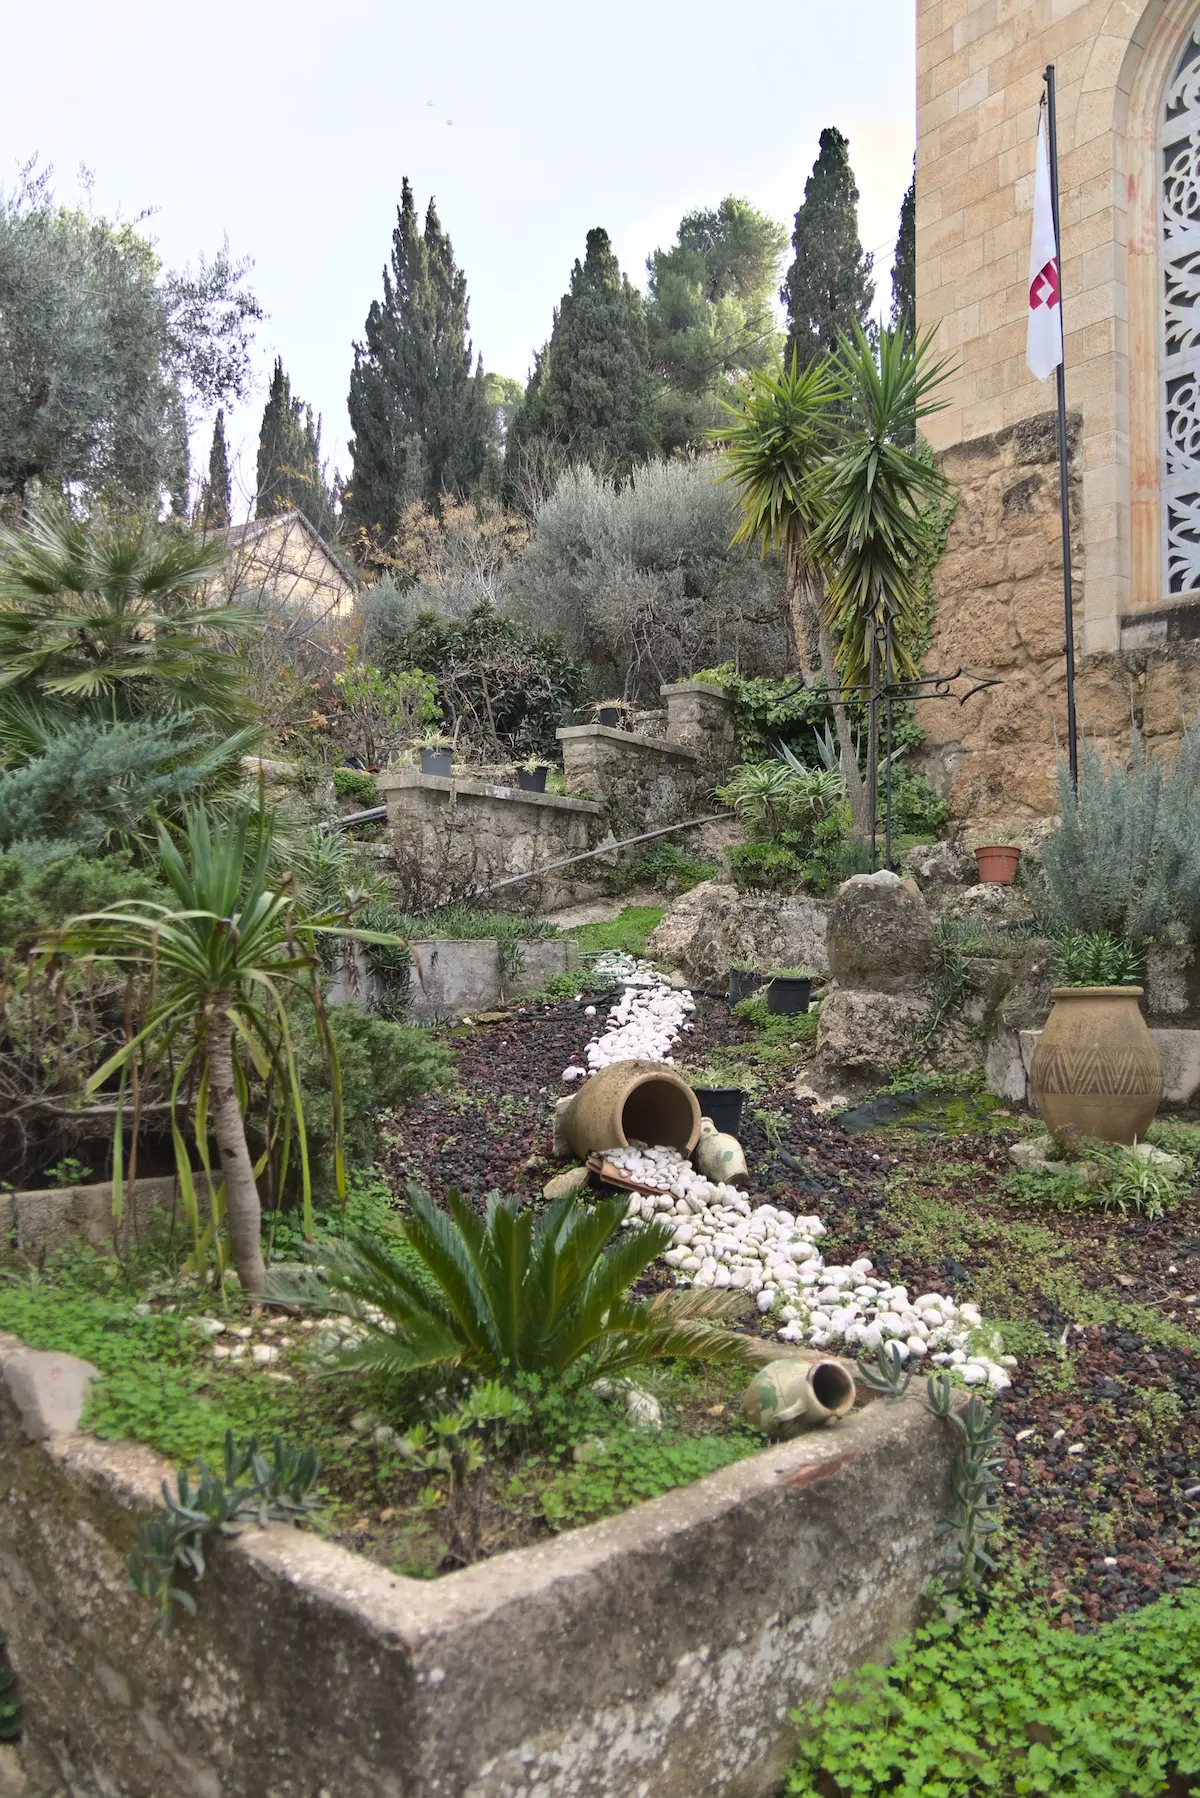 A stone garden surrounded by southern palm-like looking plants. The ground is made up of a mix of red and grey rocks. Some clay pots are intentionally placed, so that is looks like white rocks are spilling out of them.